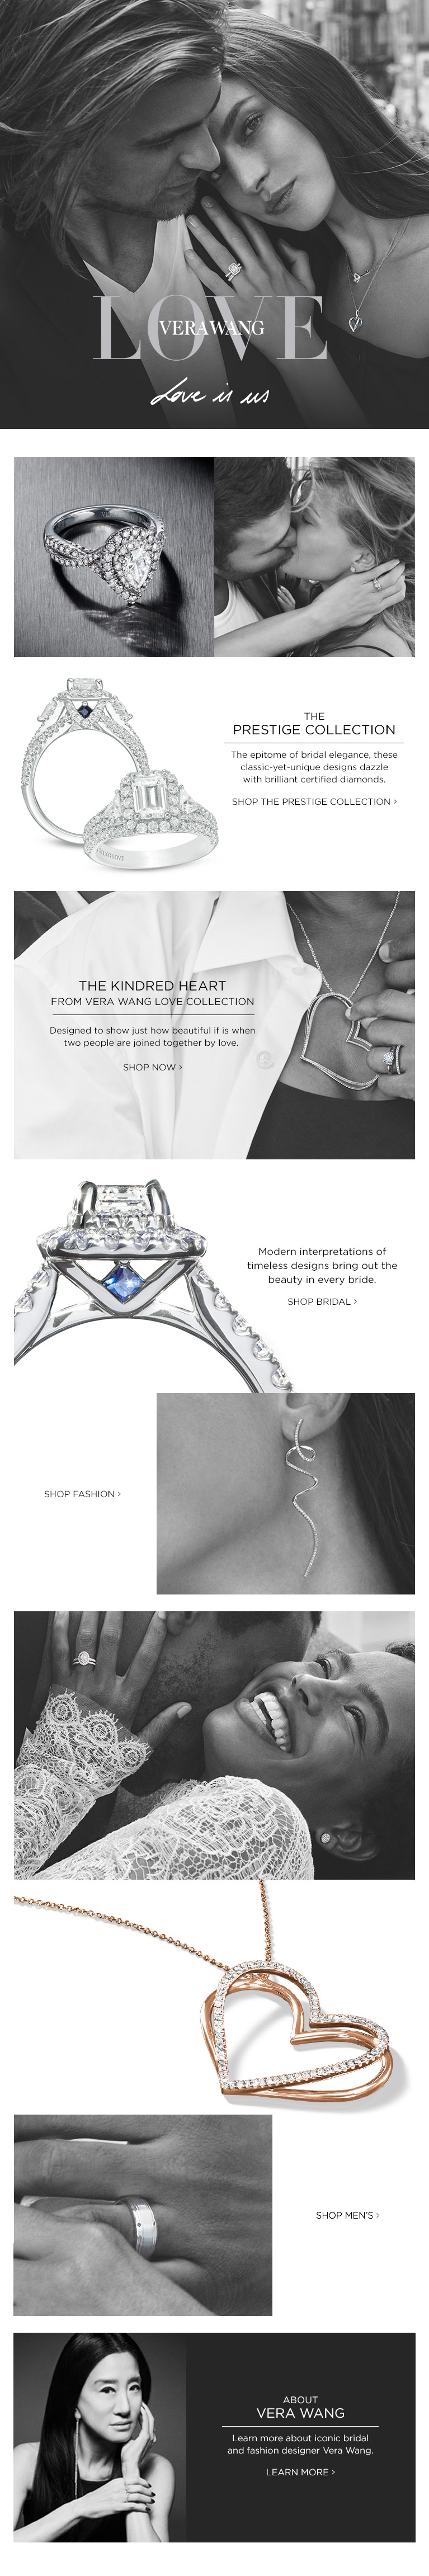 Vera Wang Love collection Exclusively at Zales. The Diamond Store.